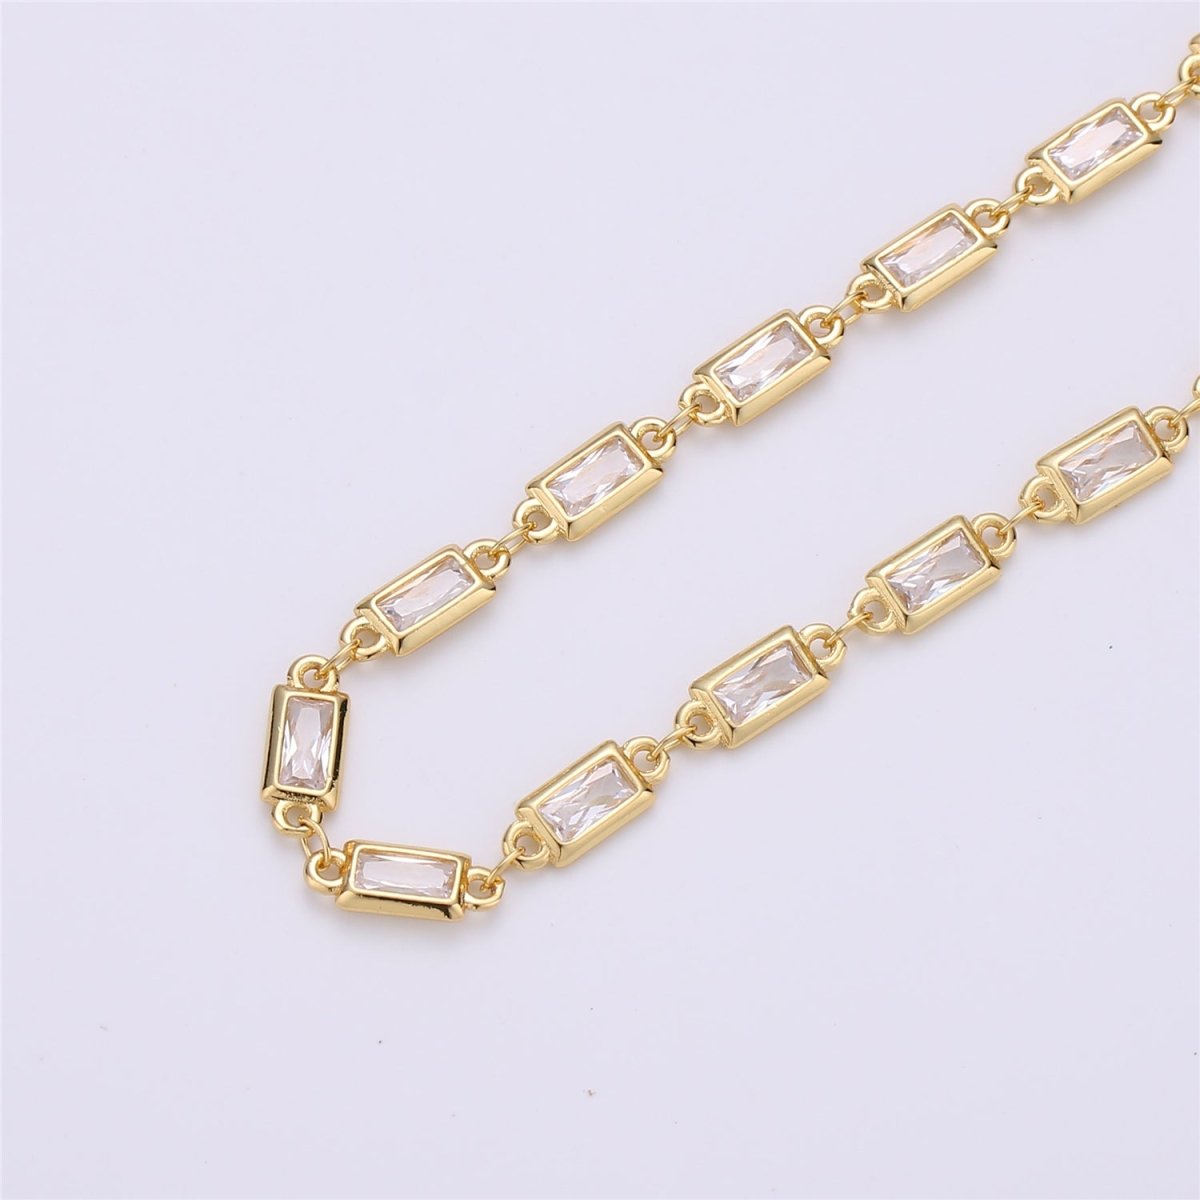 24K Gold Filled Micro Pave Colorful Charm Chain by Yard, CZ Charm Specialty Link Chain by Yard, Chain Size 20x5mm, White Gold Filled Chain | ROLL-119, ROLL-1256 Clearance Pricing - DLUXCA